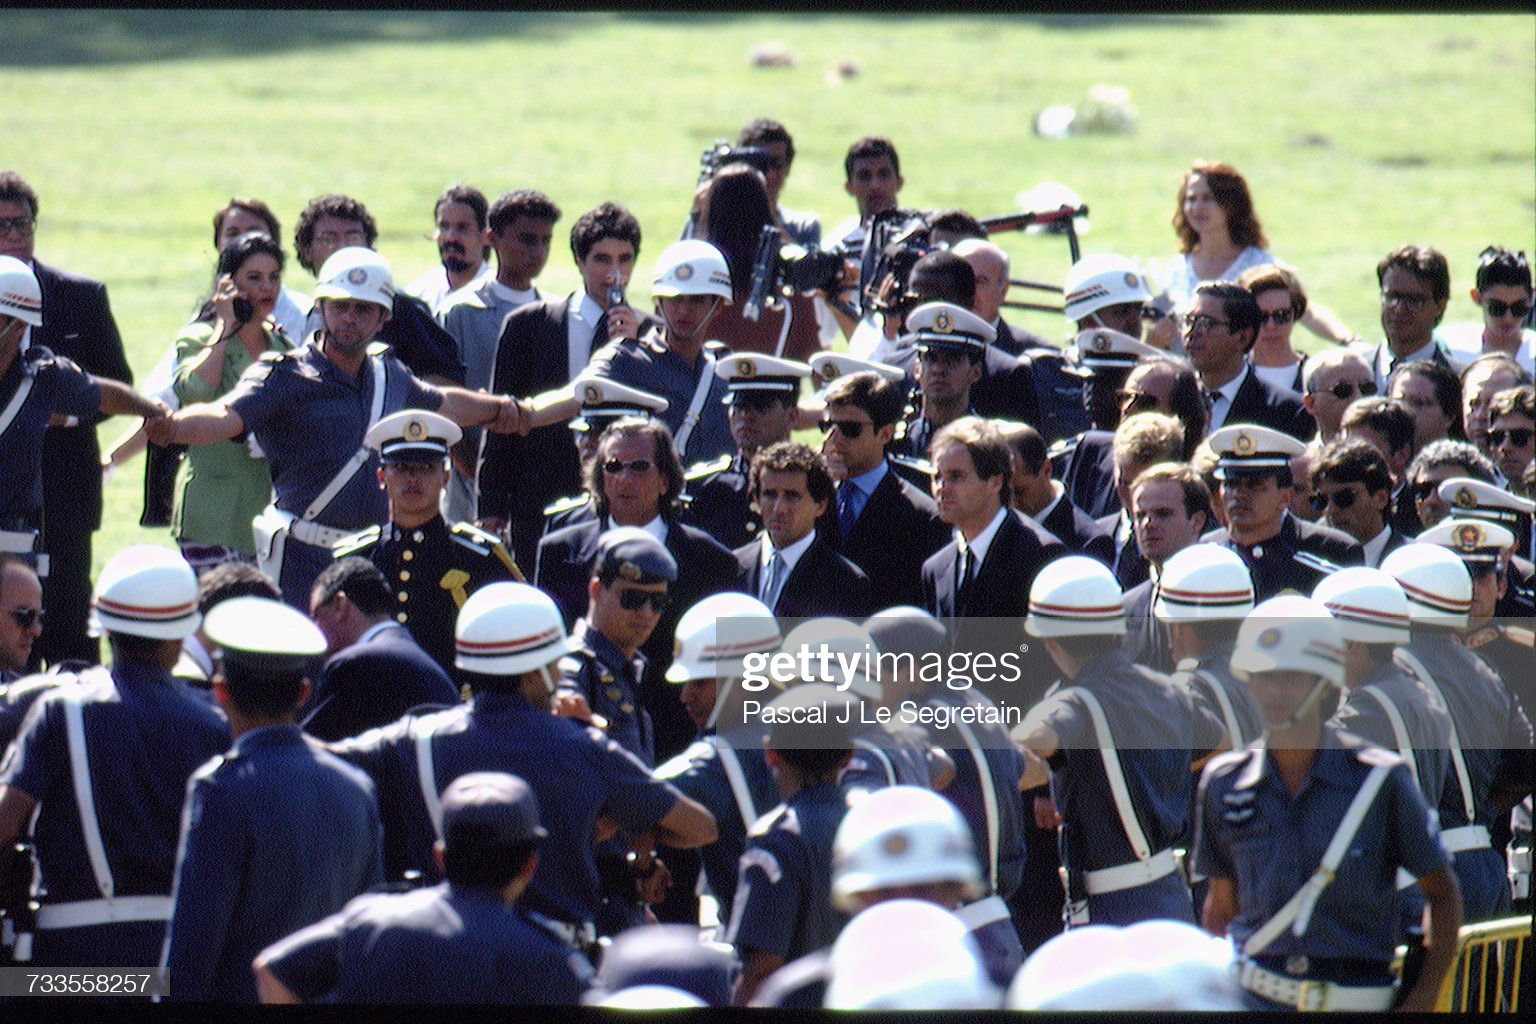 Emerson Fittipaldi, Alain Prost, Gerhard Berger and Rubens Barrichello at the funeral of Ayrton Senna.